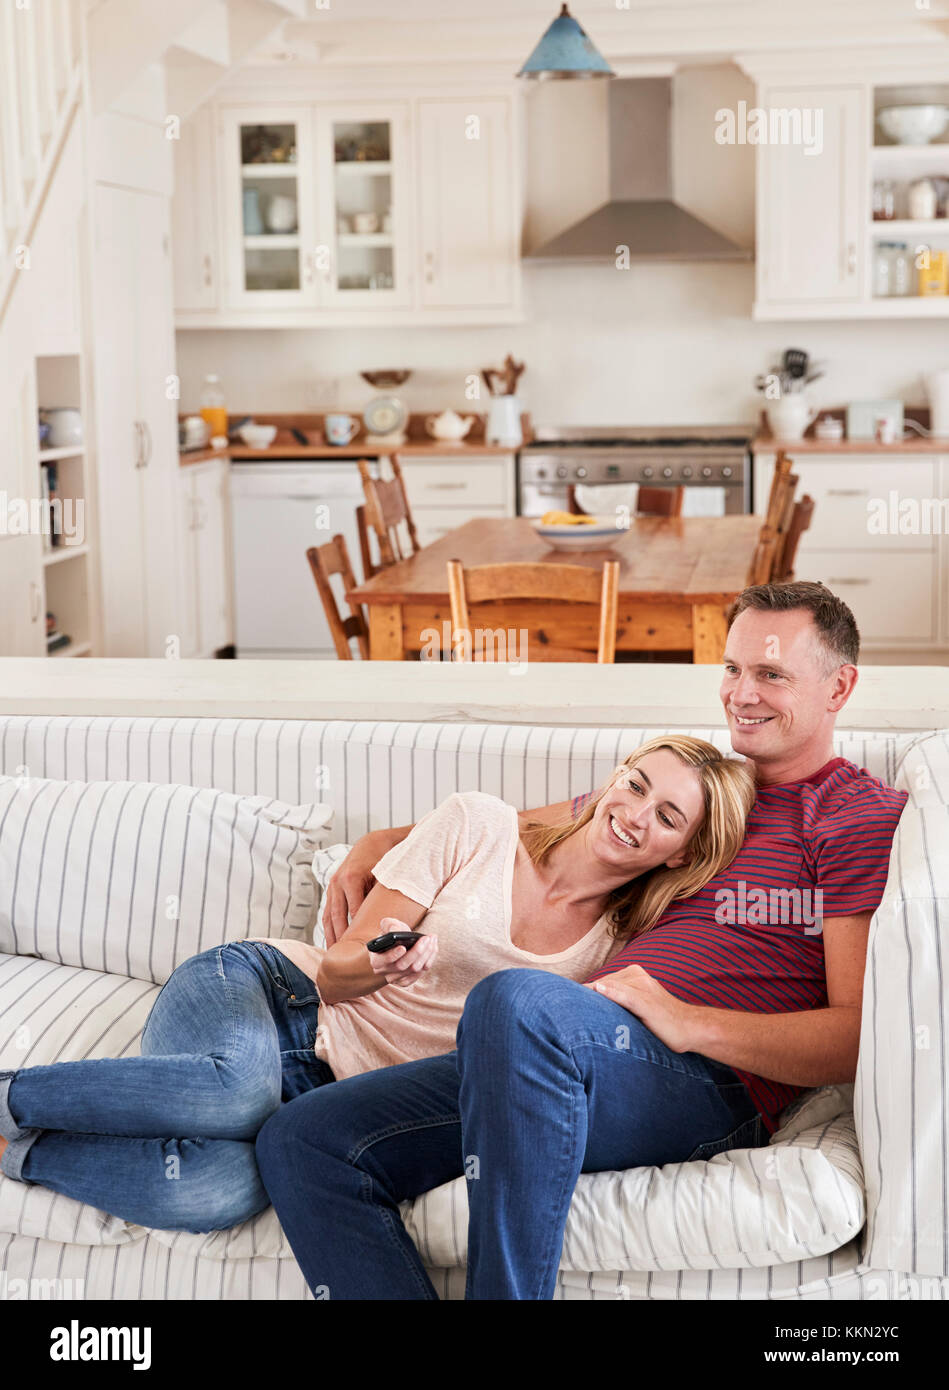 Couple Sitting On Sofa Watching Television Together Stock Photo